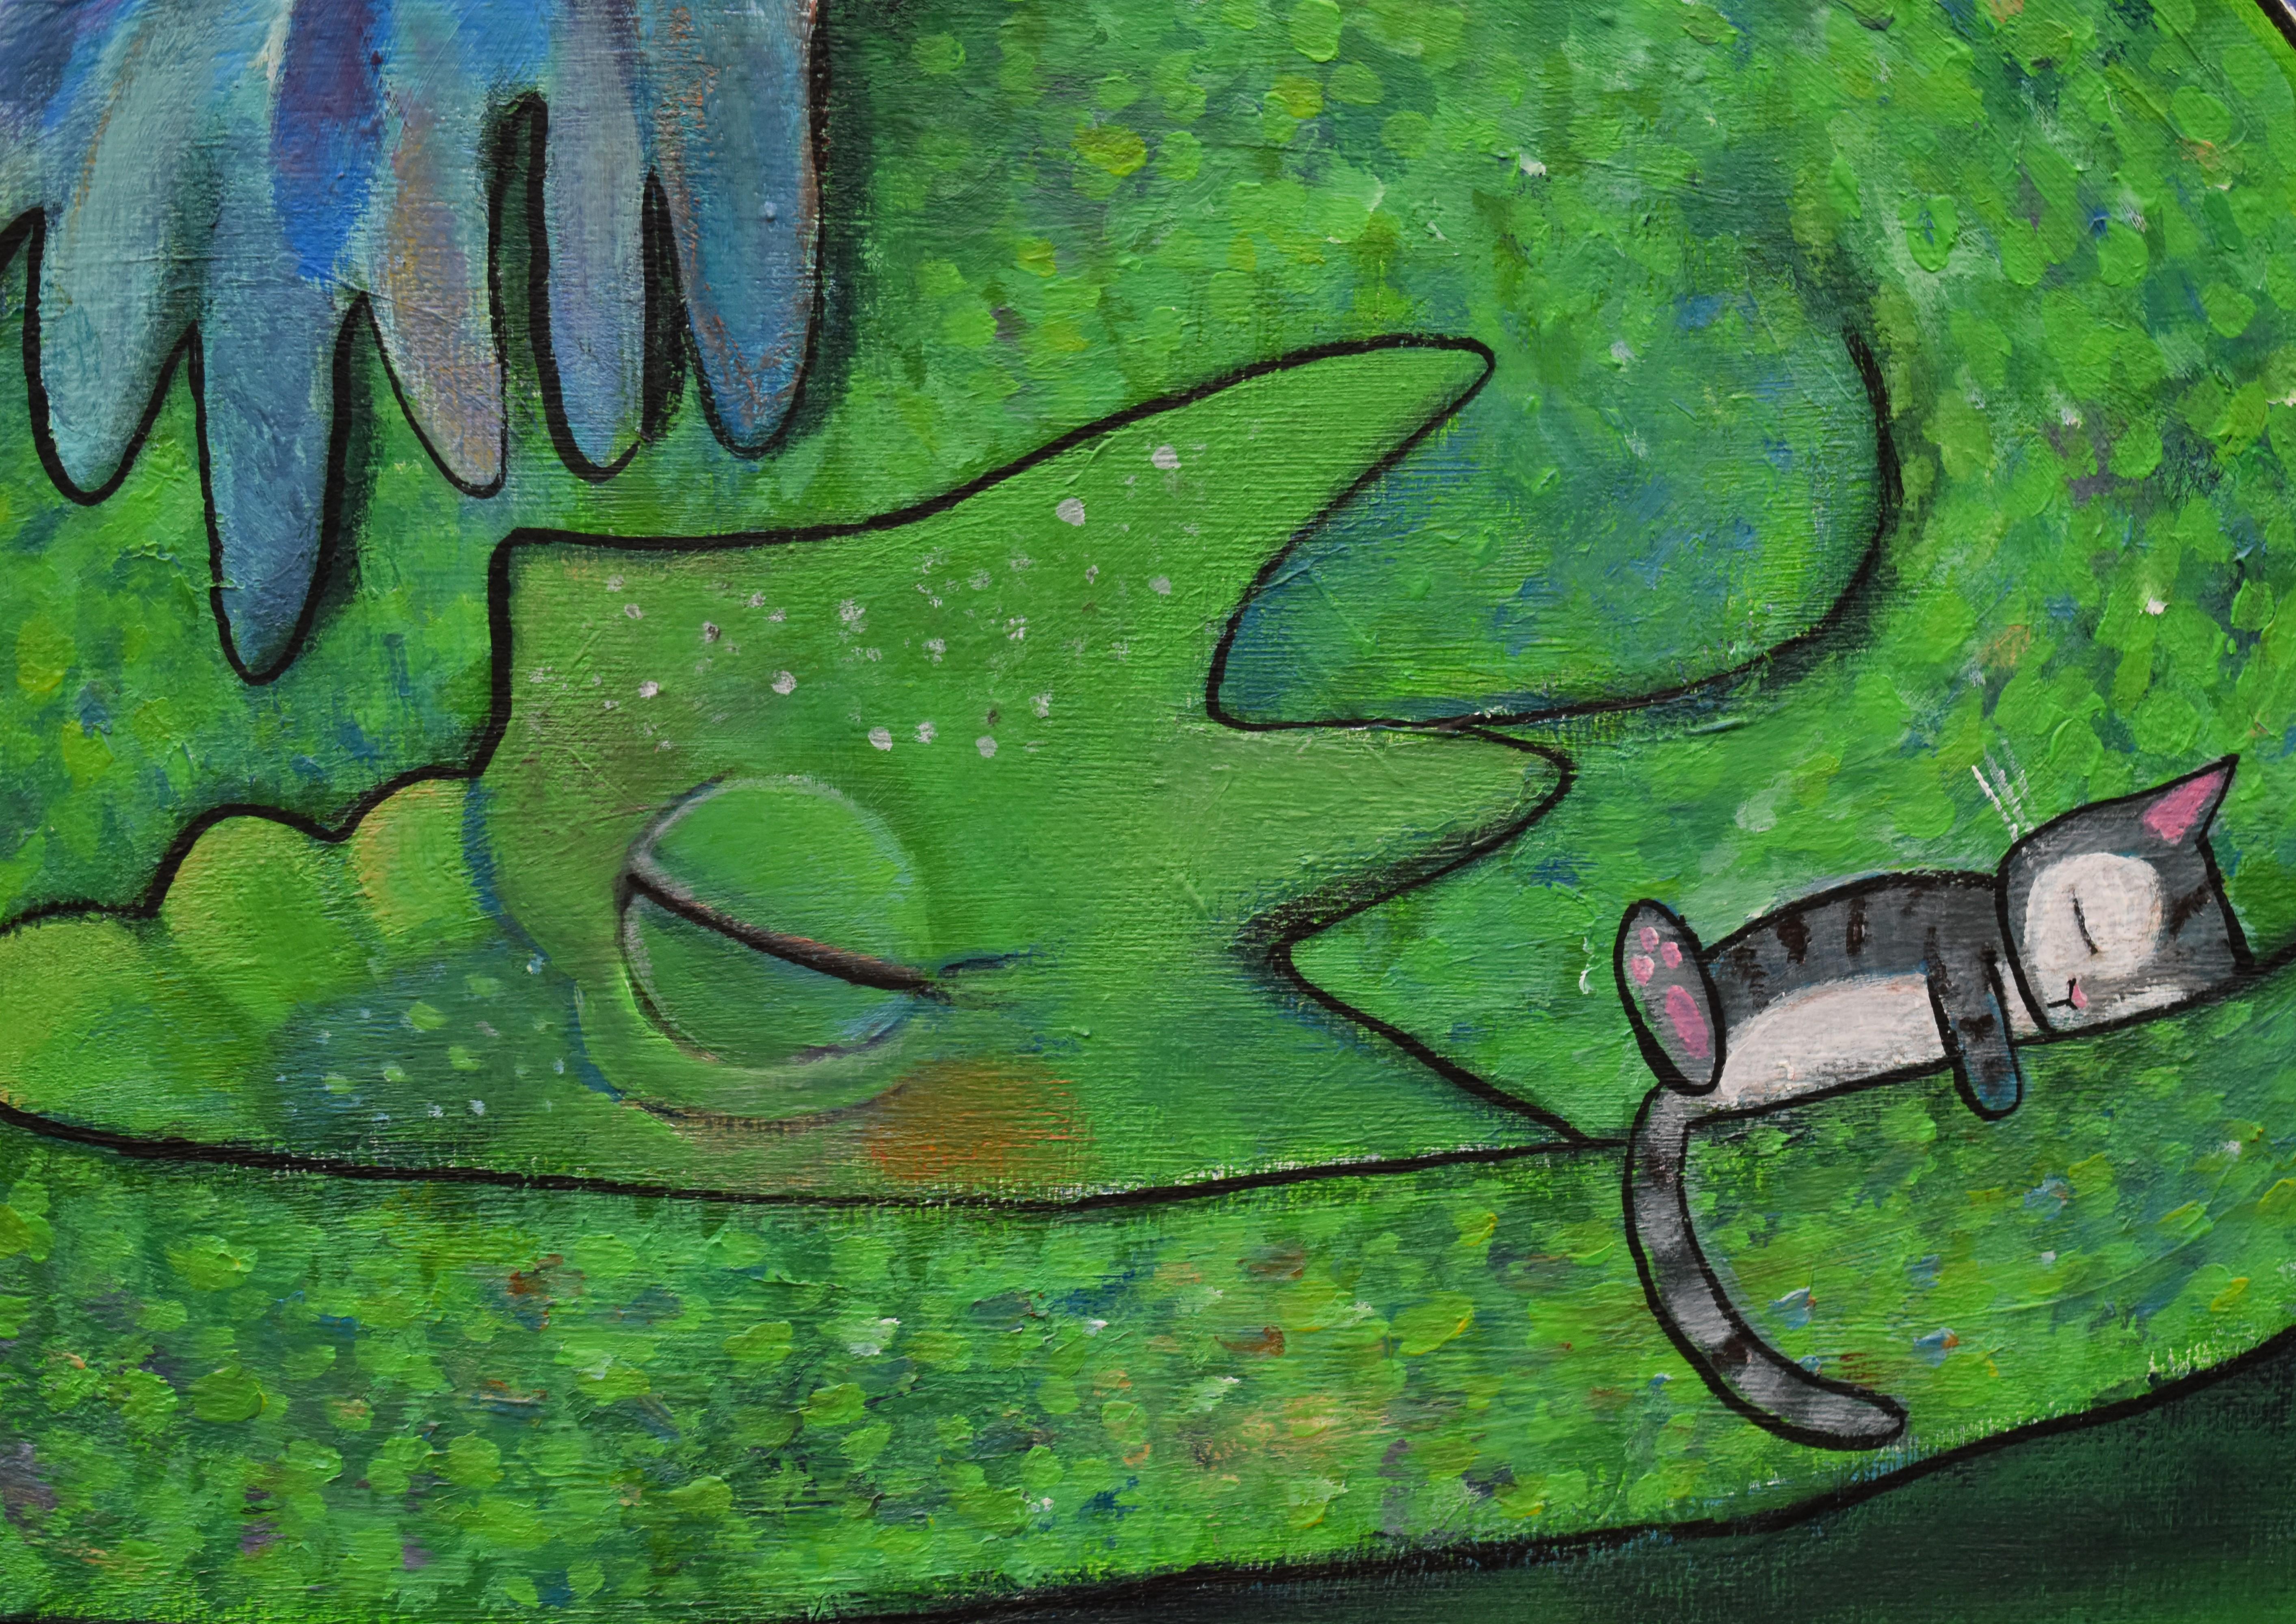 <p>Artist Comments<br>Artist Andrea Doss presents a playful image of a green dragon dozing off with its two feline friends. 